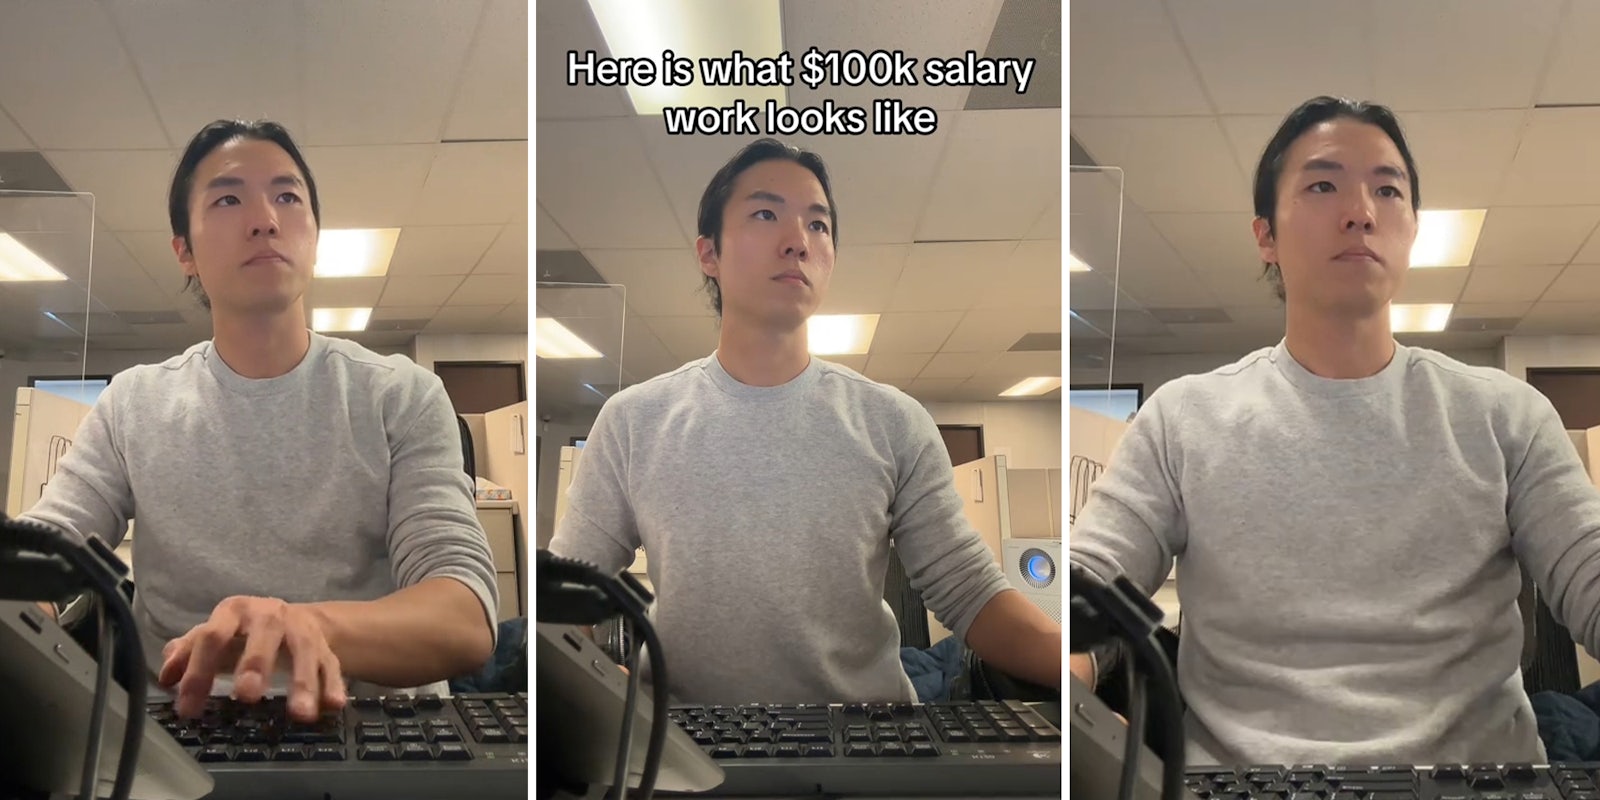 Worker with $100K salary shares what his job is like